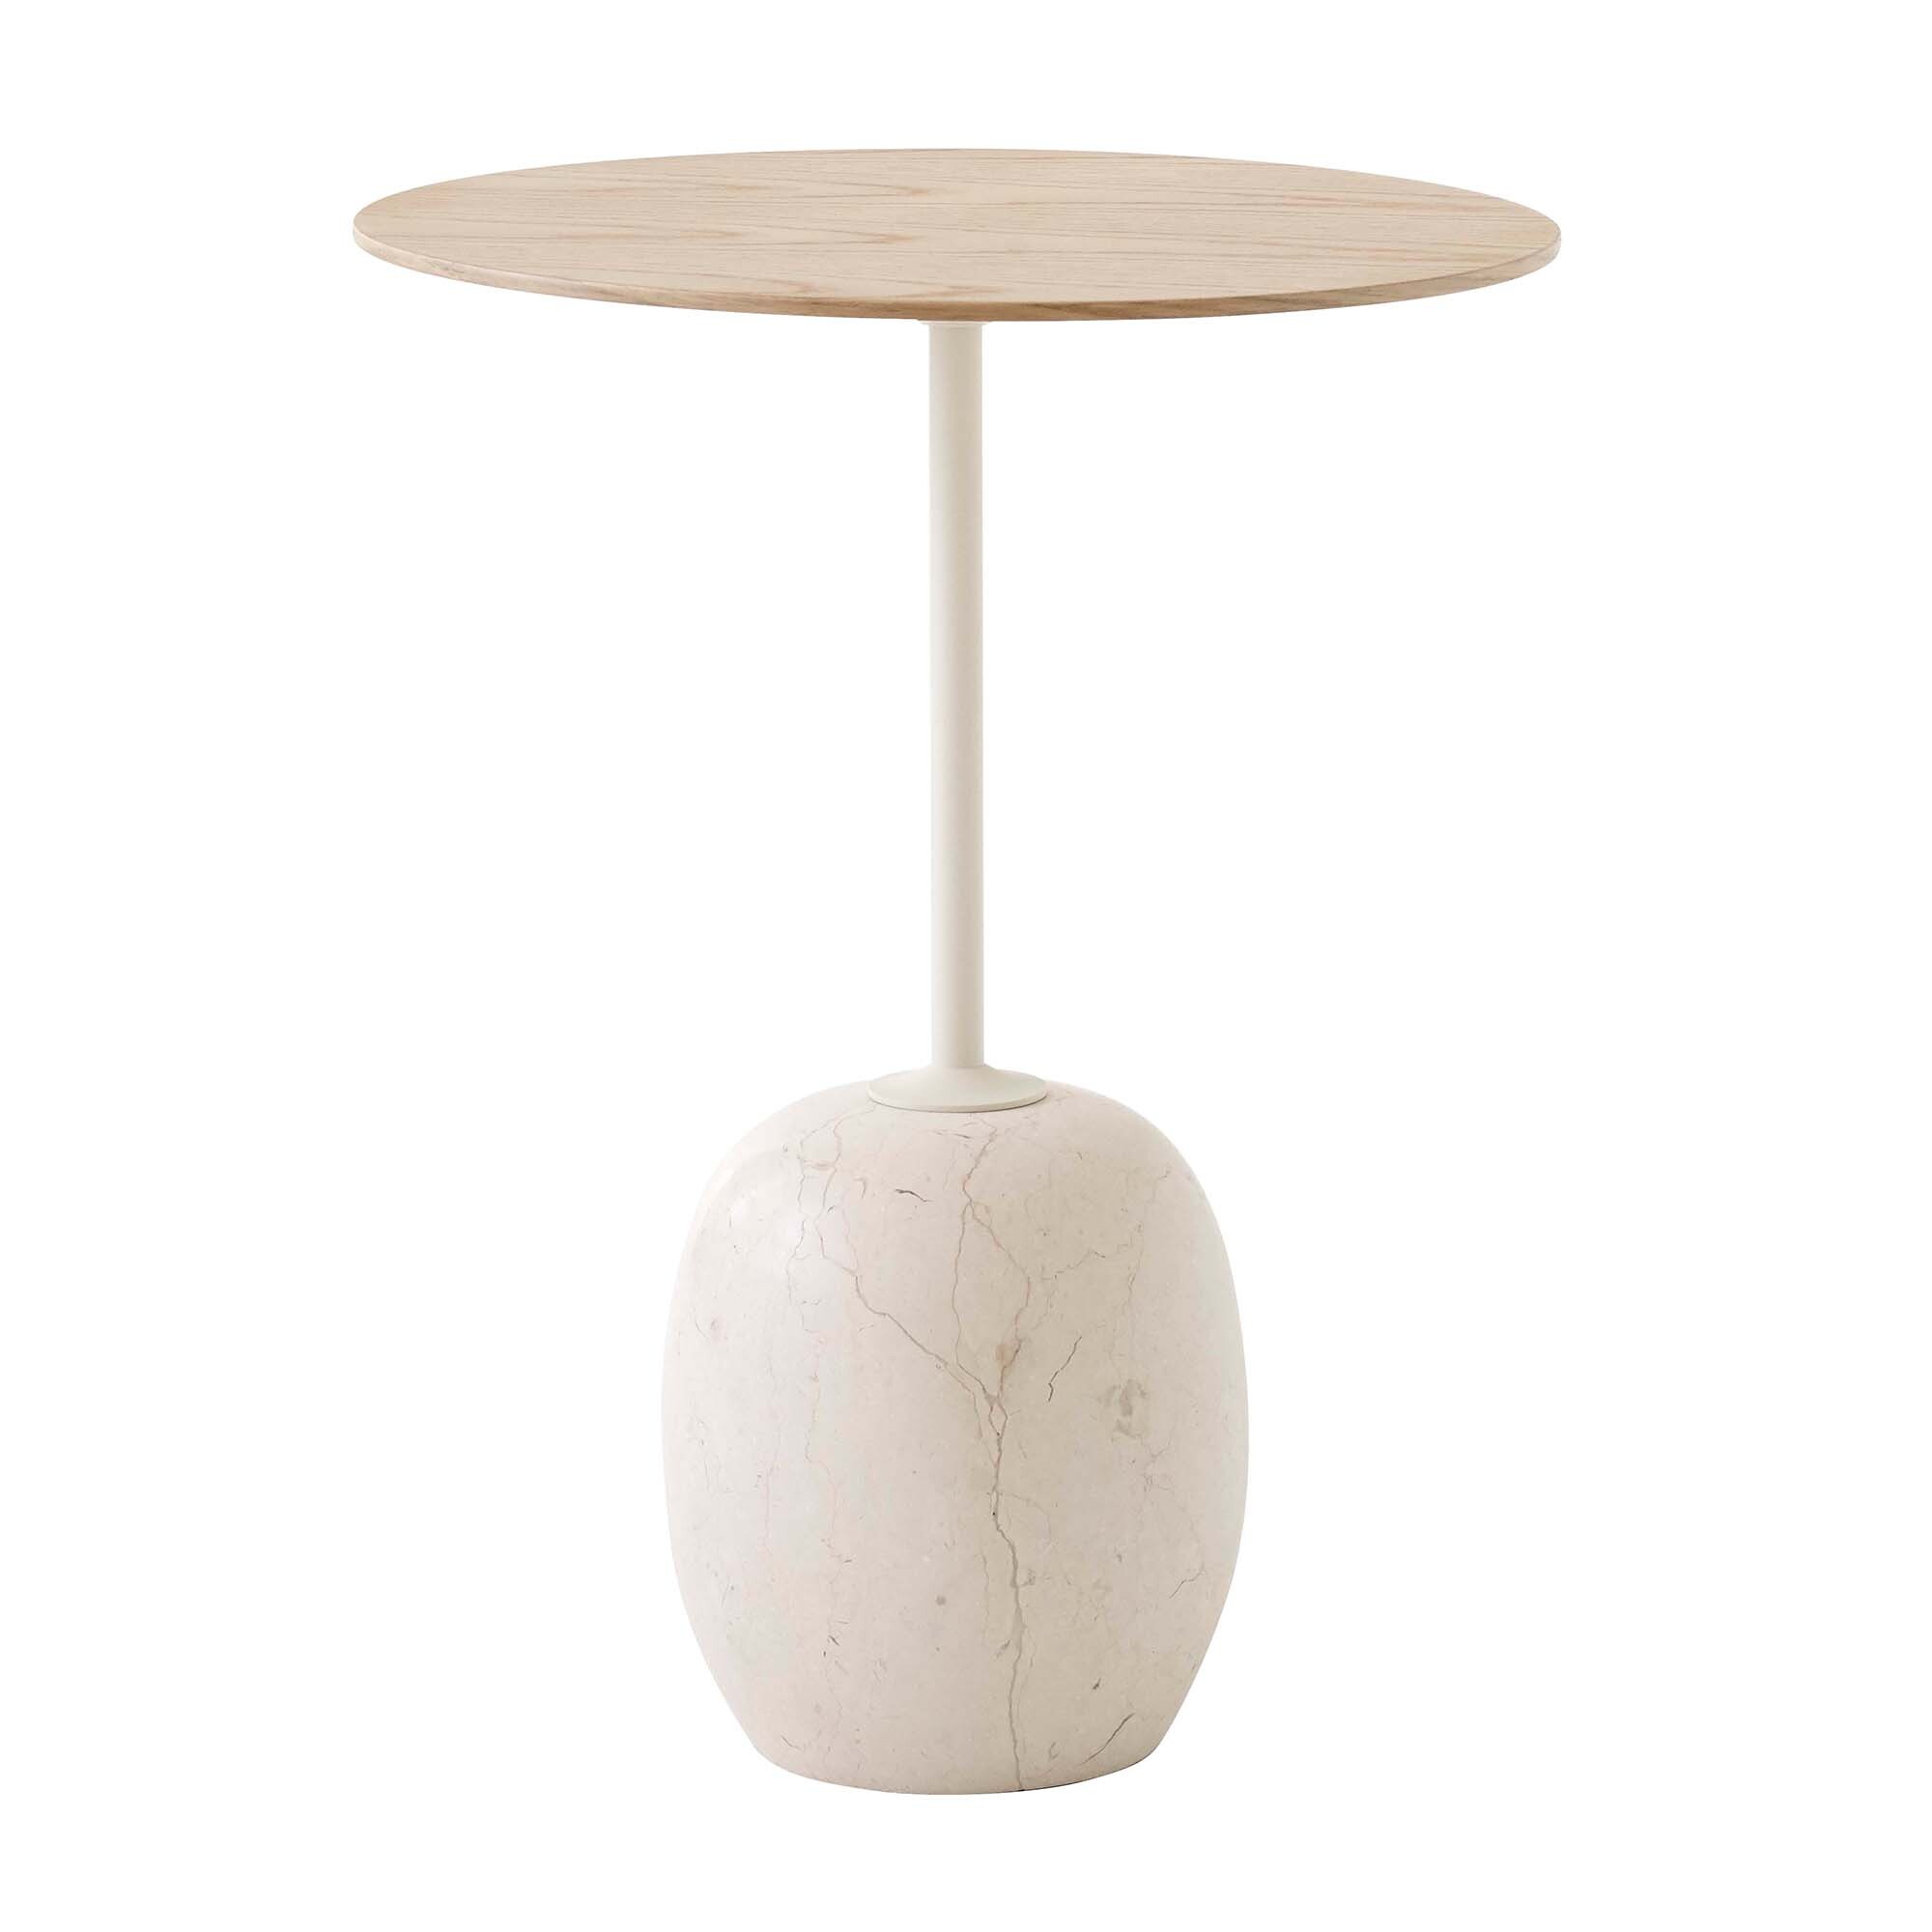 Tradition Lato Ln8 Side Table Top Wood, Round Side Table Topper